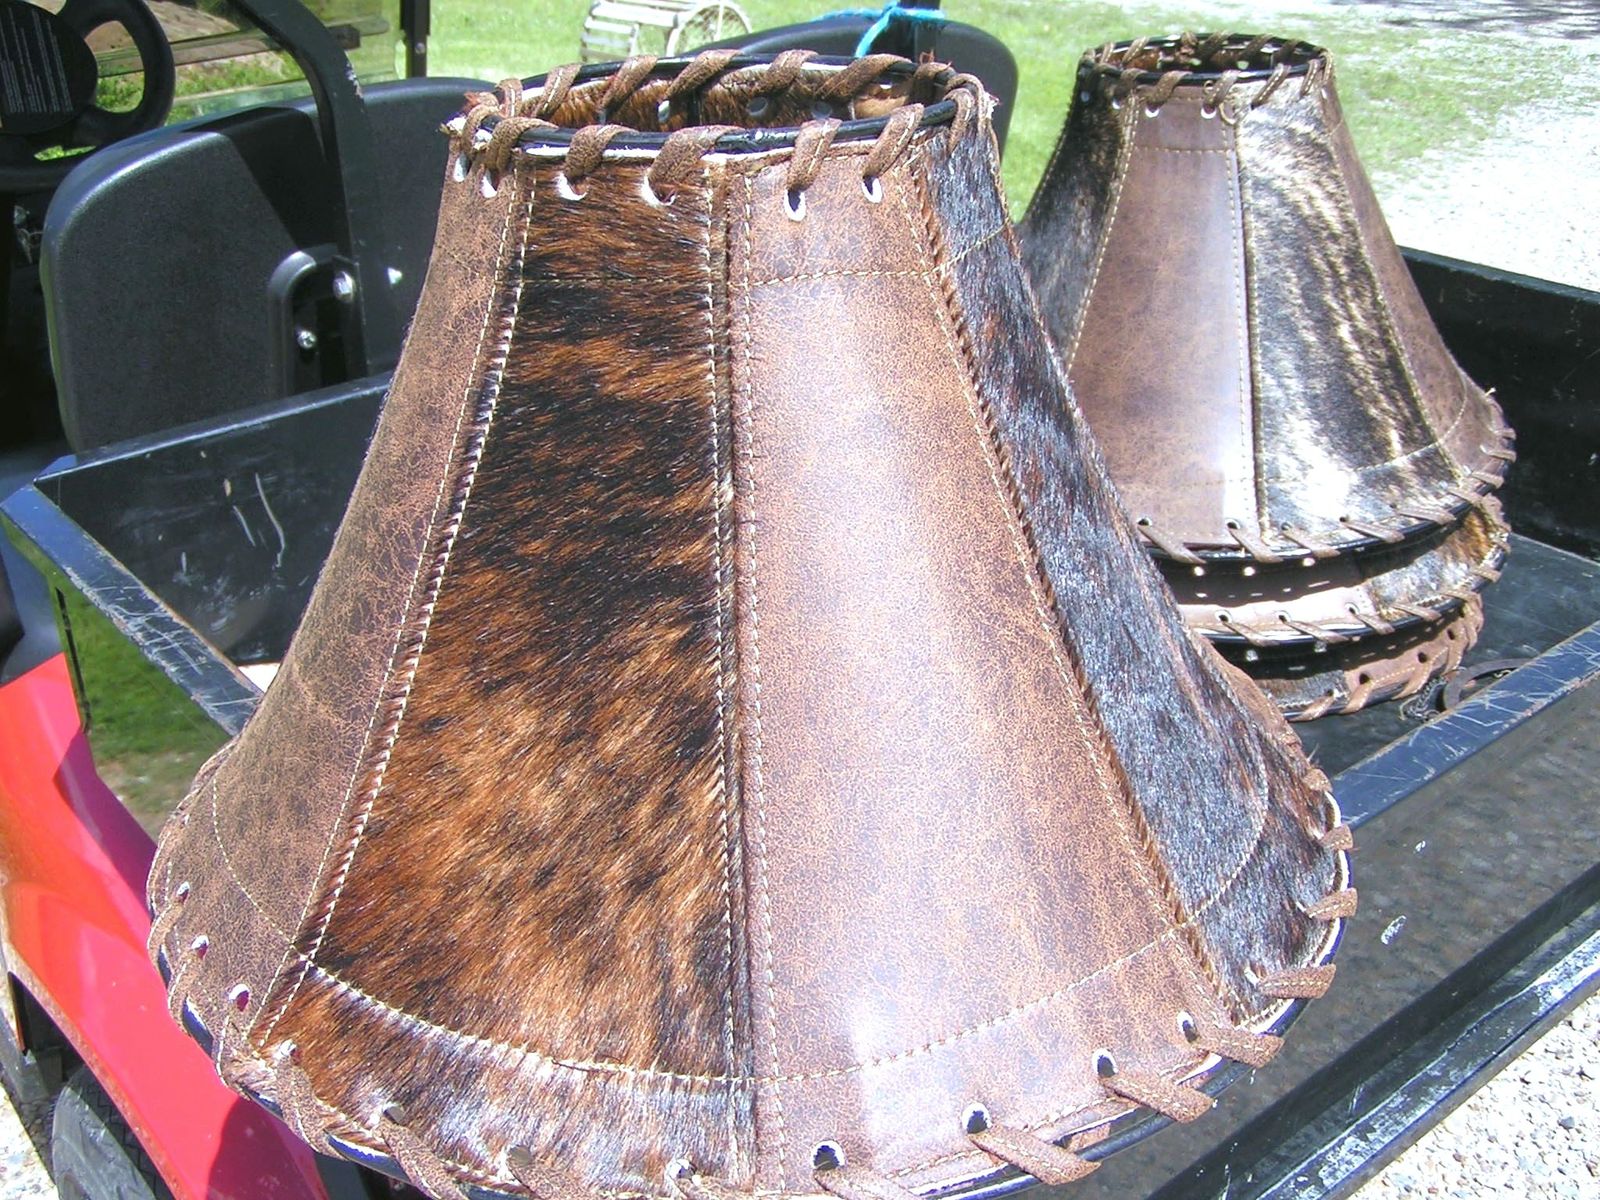 Leather and Cowhide Lamp Shade Southwestern Decor 0316 bz - $169.98